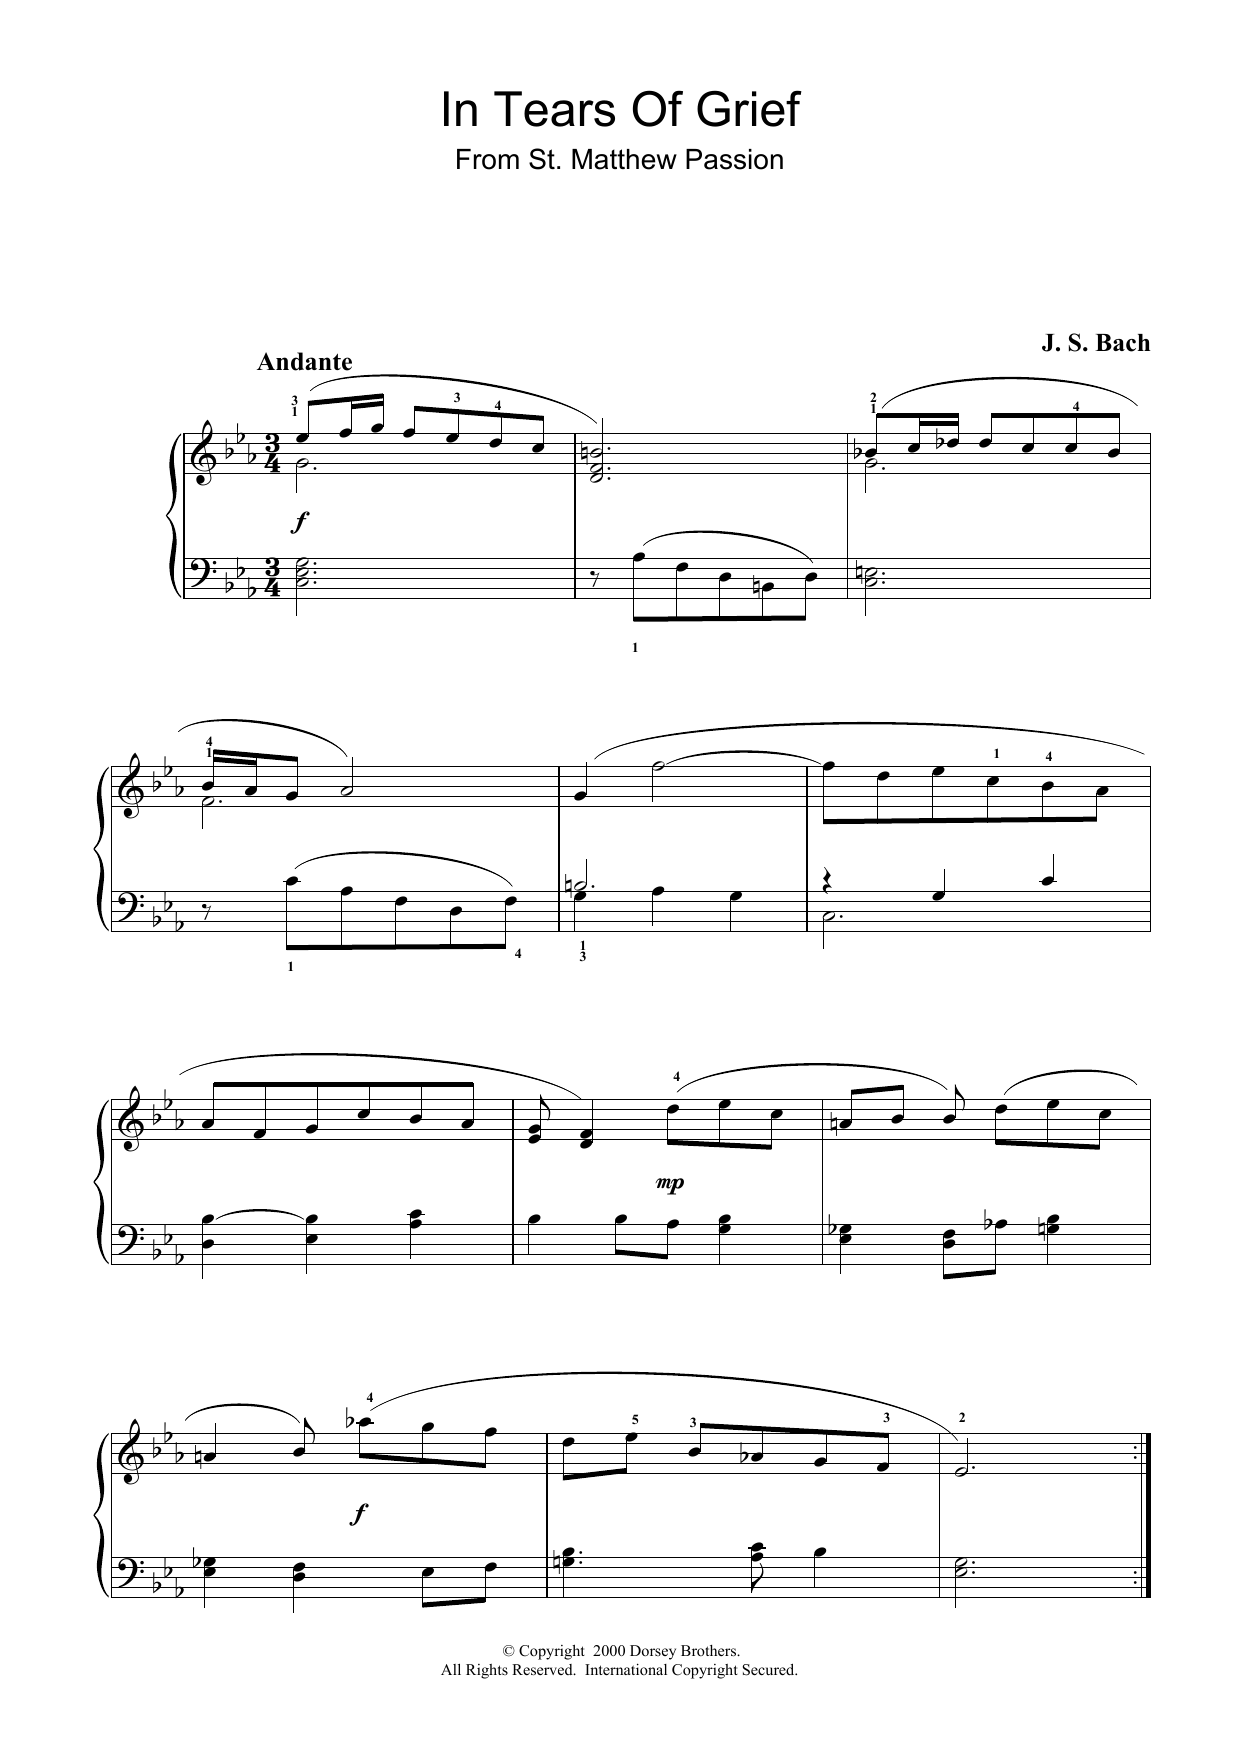 Johann Sebastian Bach In Tears Of Grief (from St Matthew Passion) sheet music notes printable PDF score